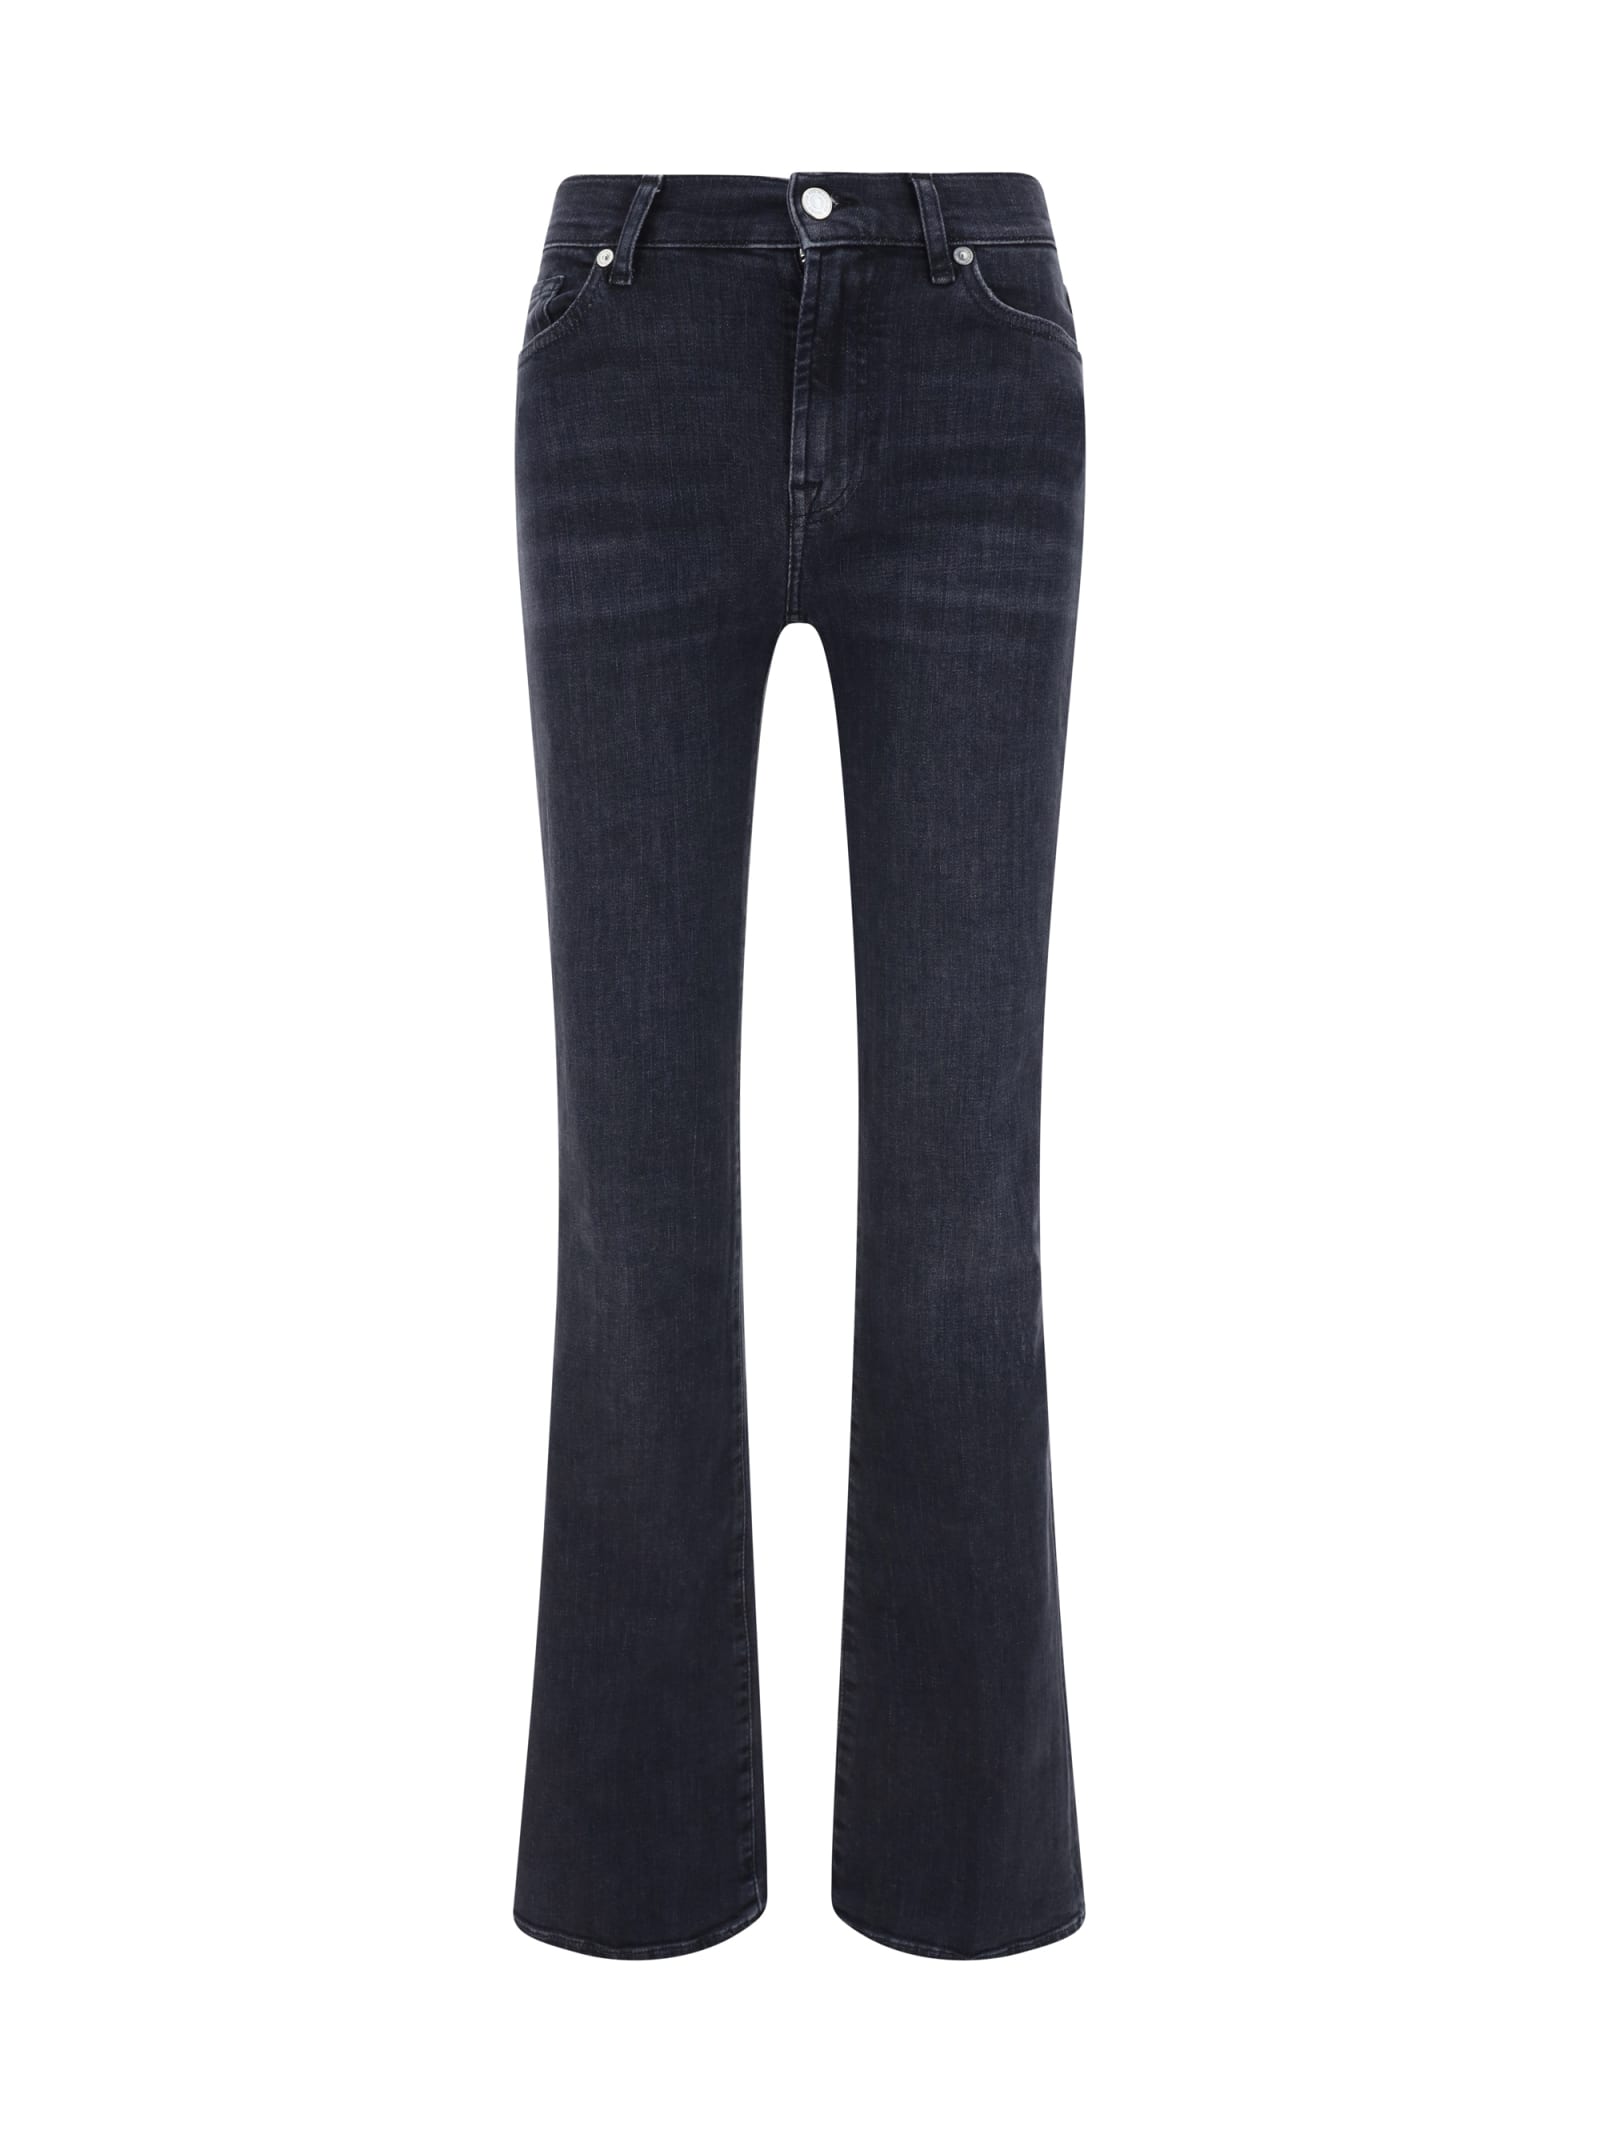 7 For All Mankind Illusion Space Jeans In Blue